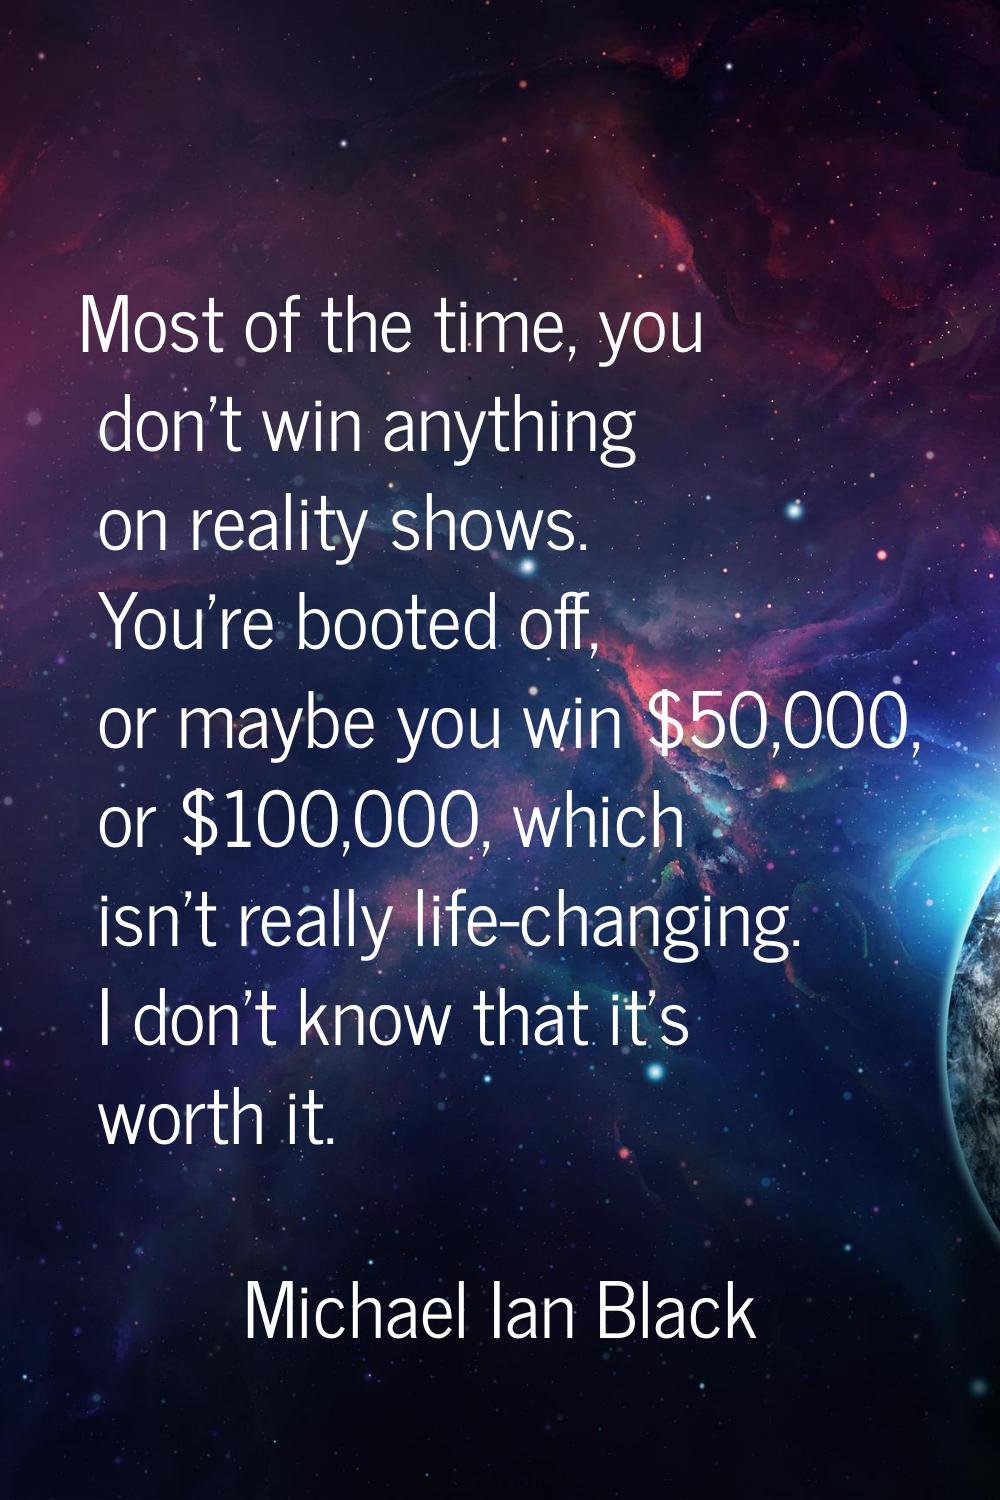 Most of the time, you don't win anything on reality shows. You're booted off, or maybe you win $50,